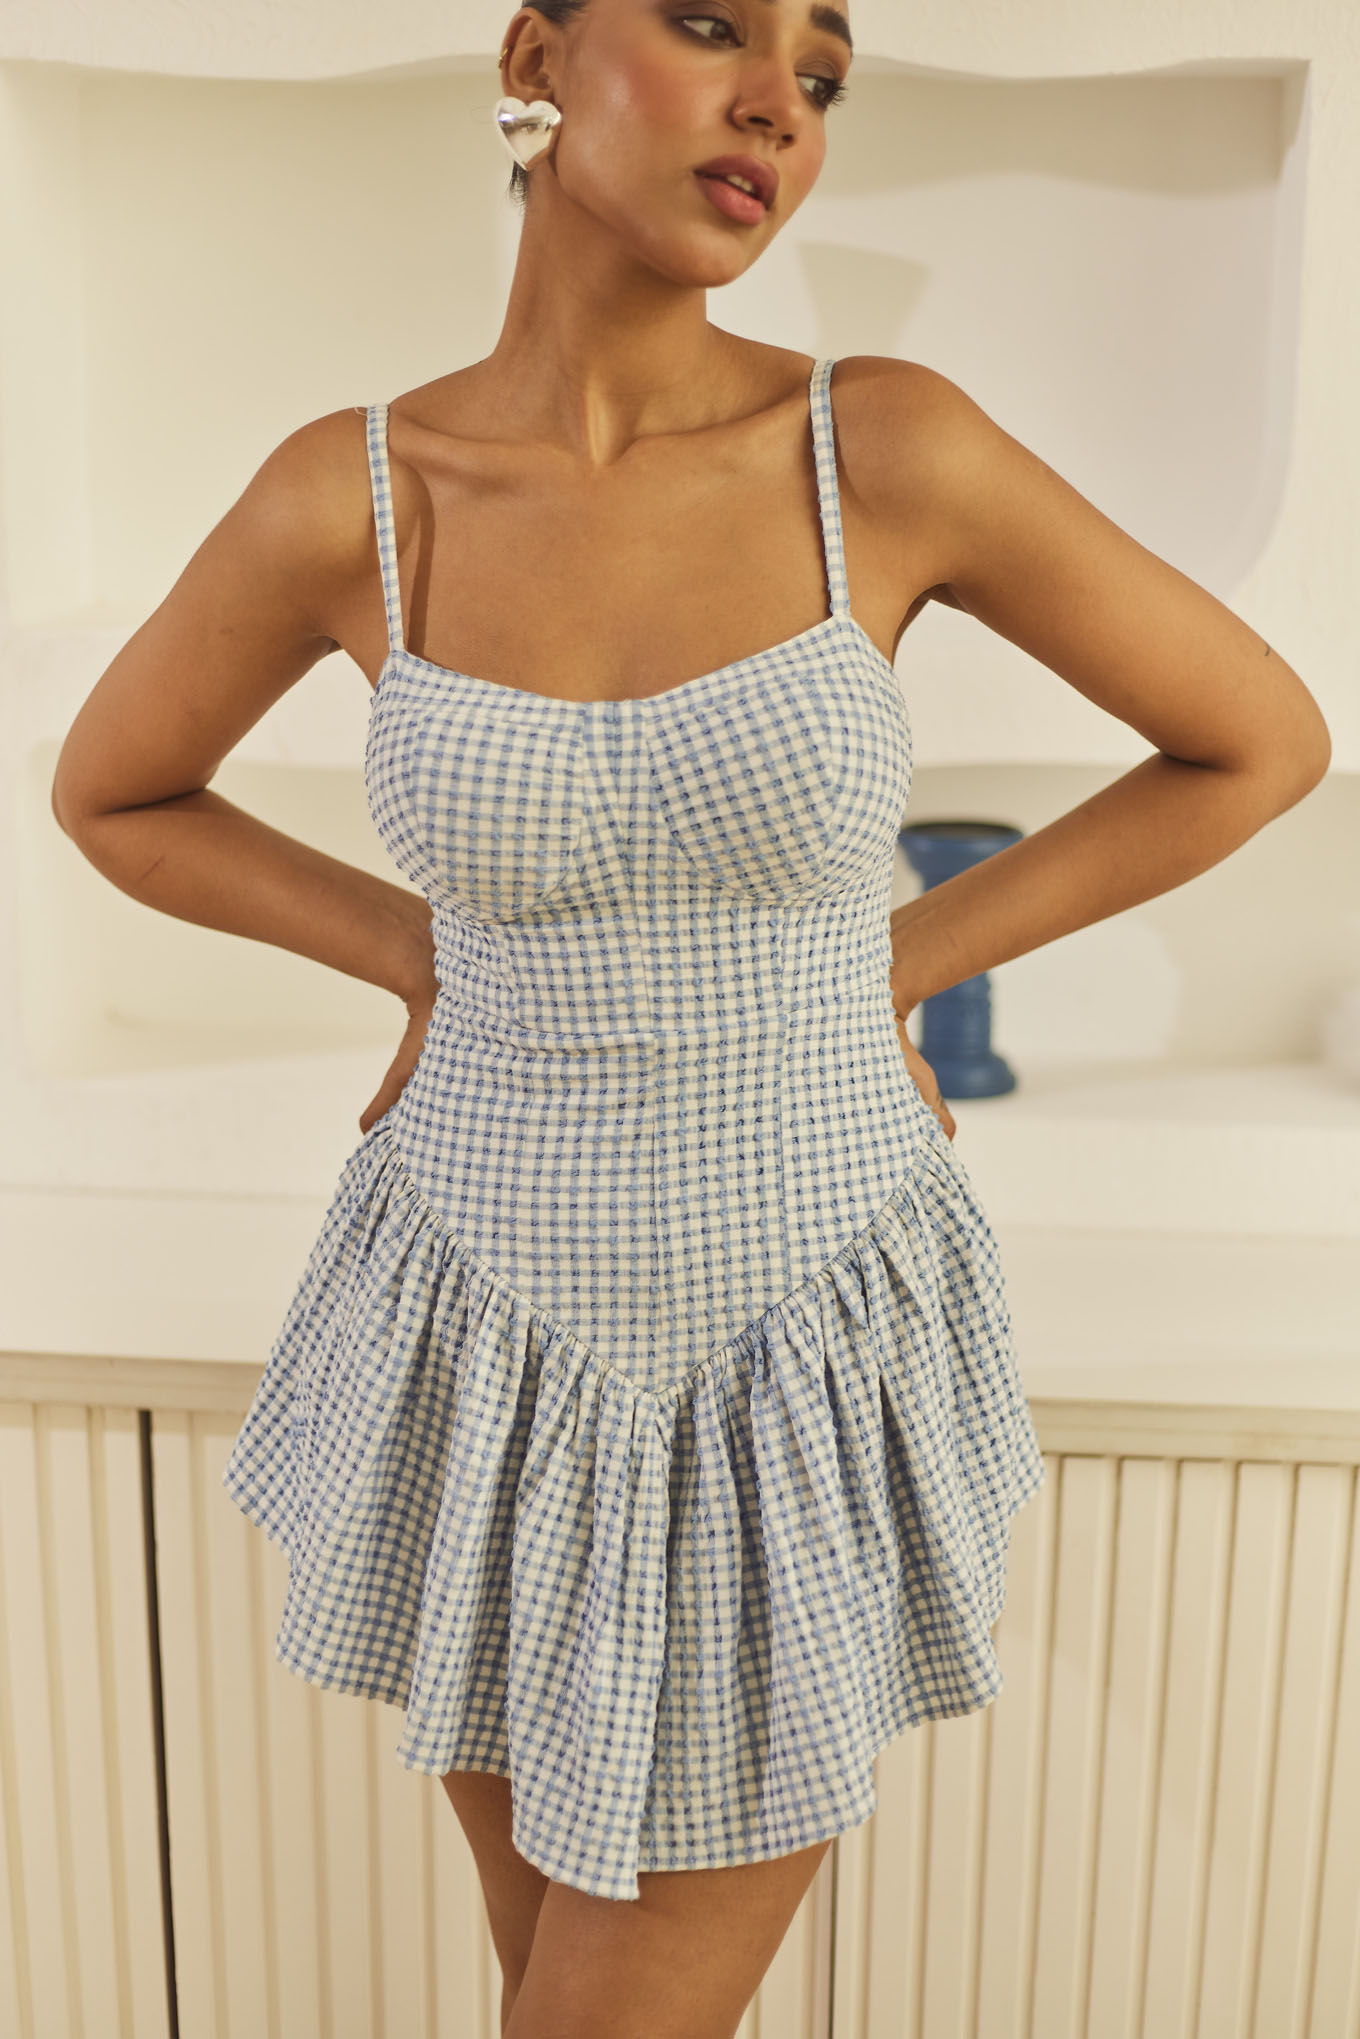 Gingham Corsetry-Inspired Dress RFD